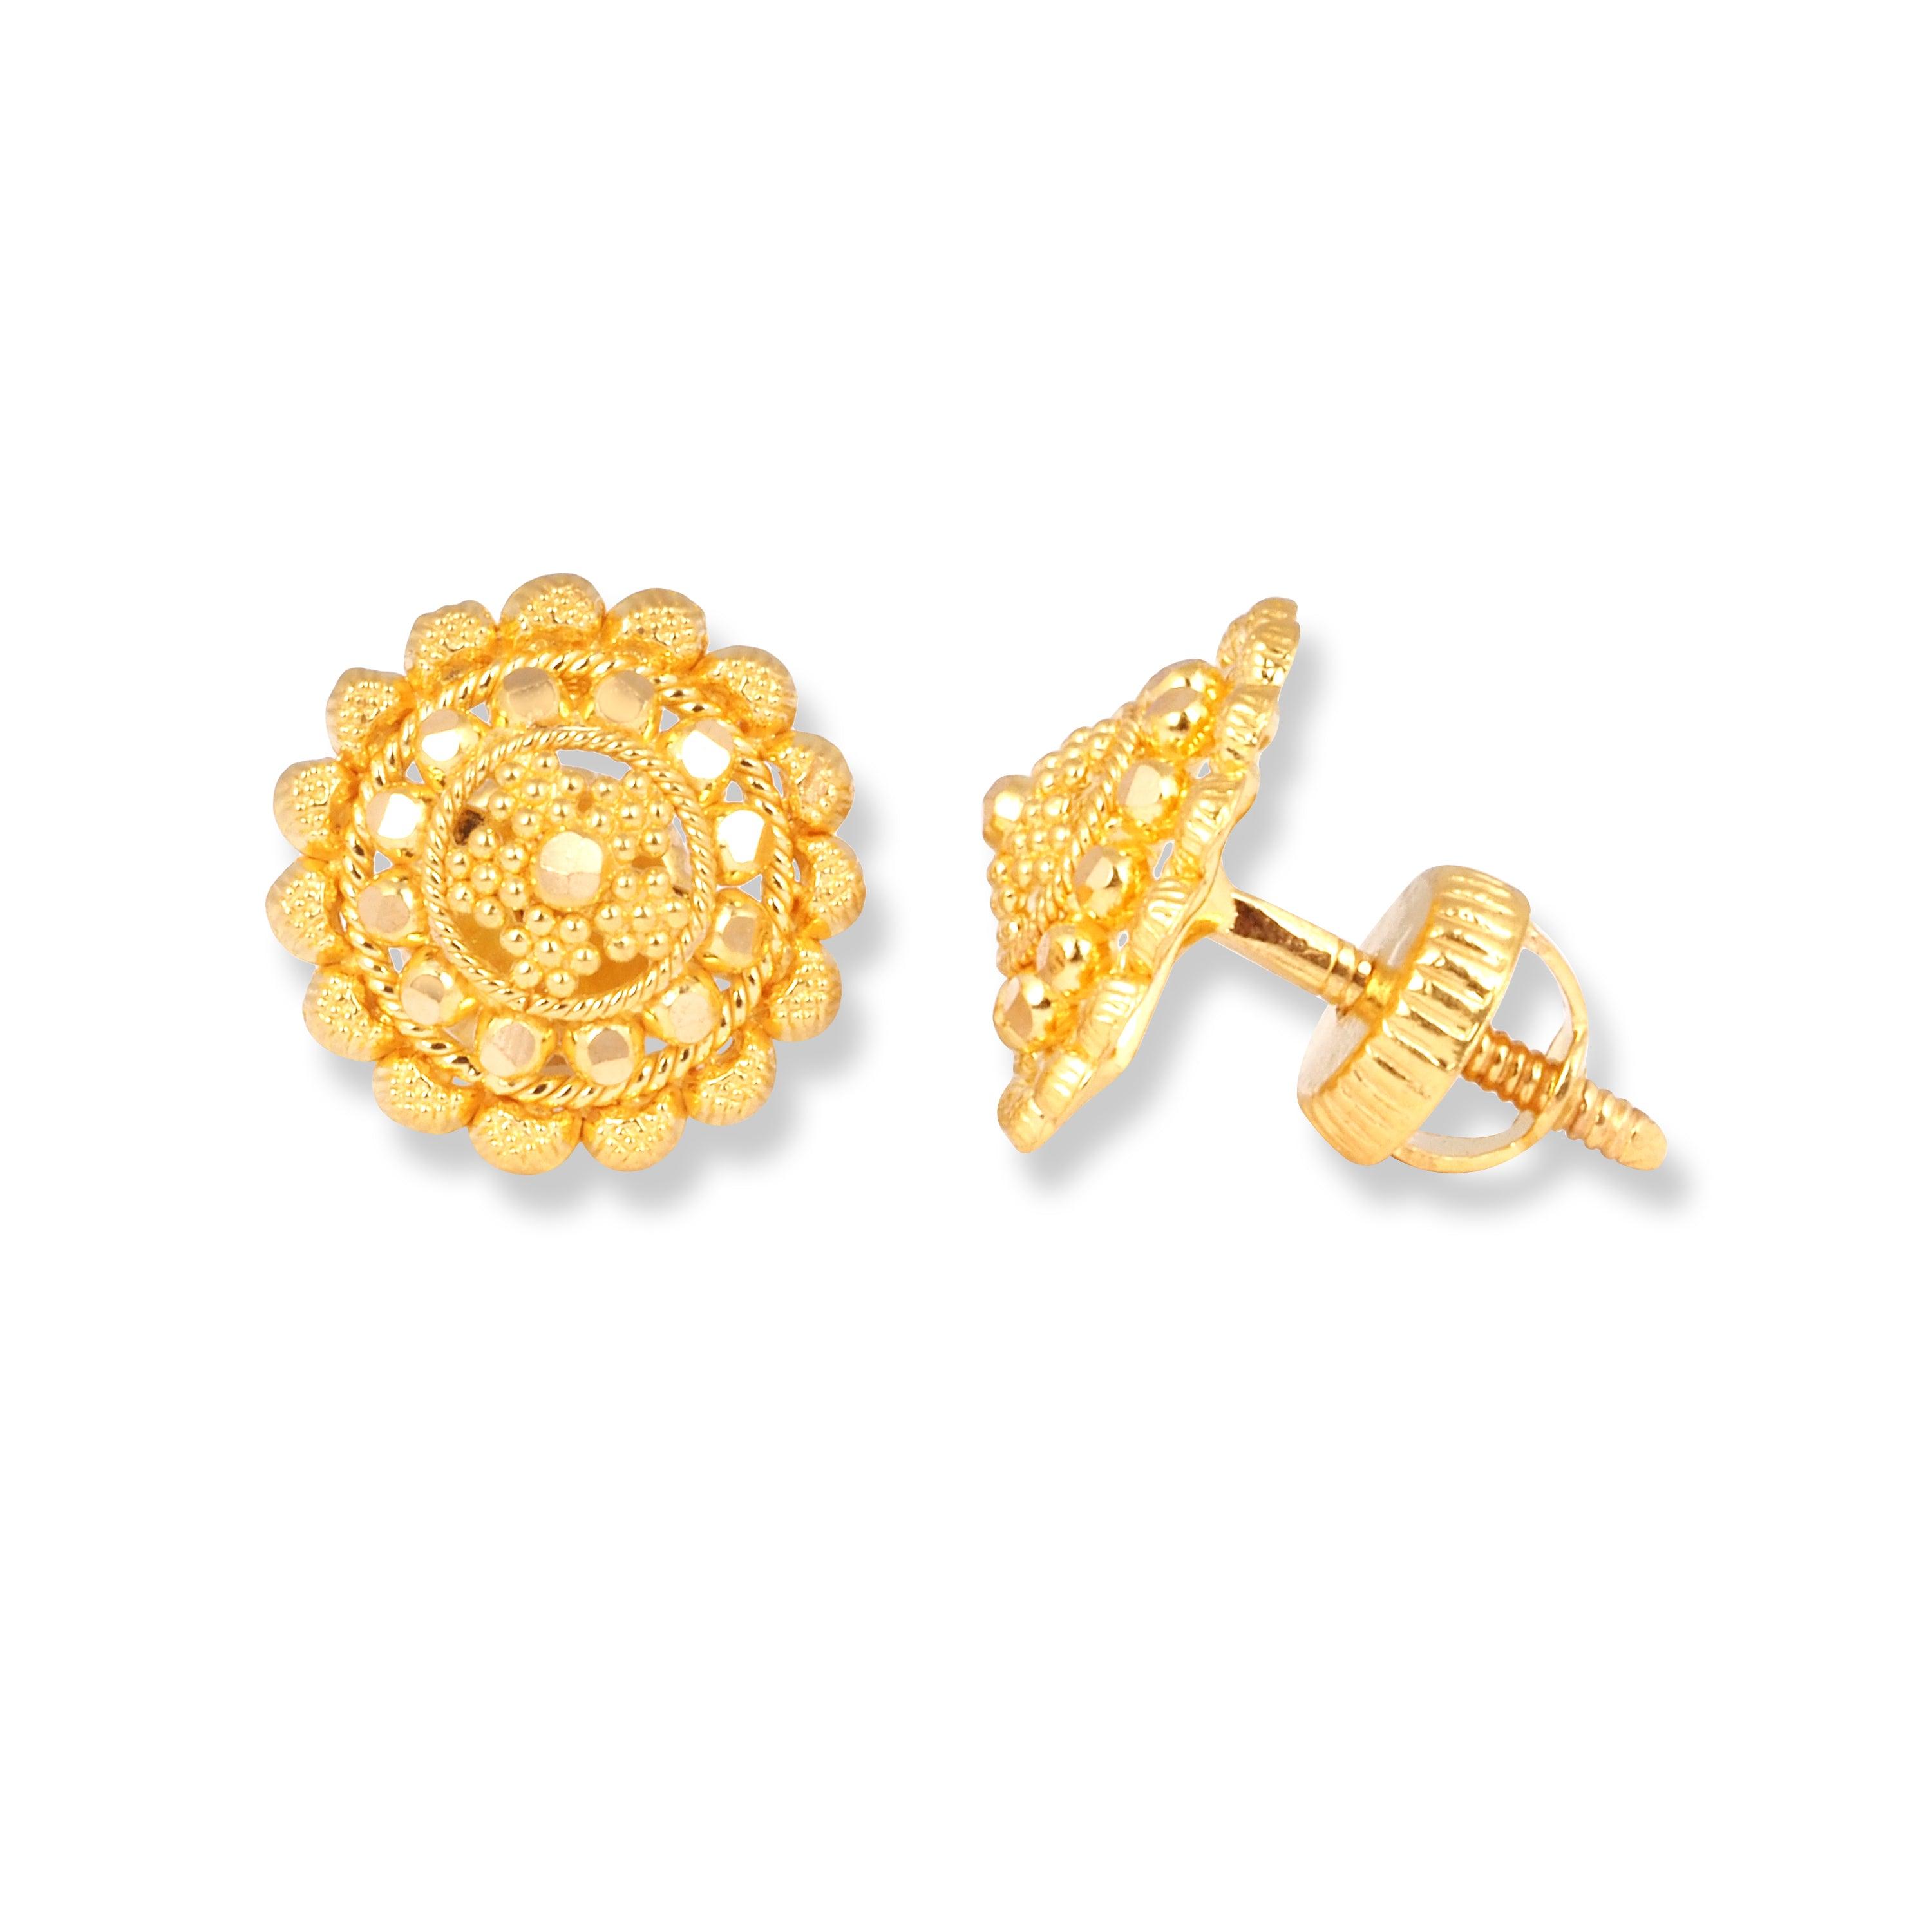 22ct Gold Earrings with Filigree Design (4.1g) E-7884 - Minar Jewellers